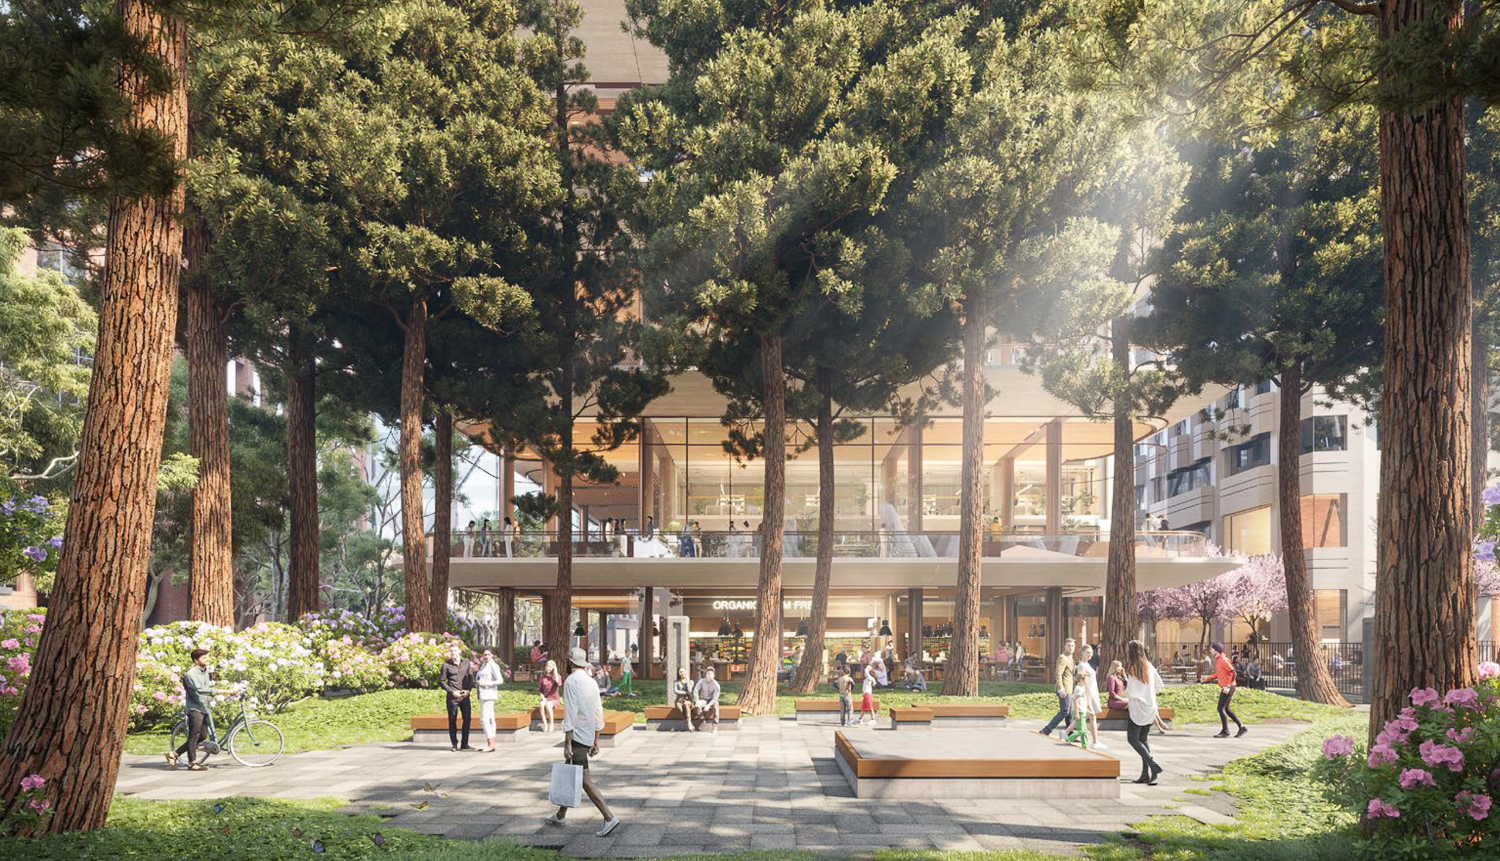 3 Transamerica seen from the planned new Redwood Park, rendering by Foster + Partners